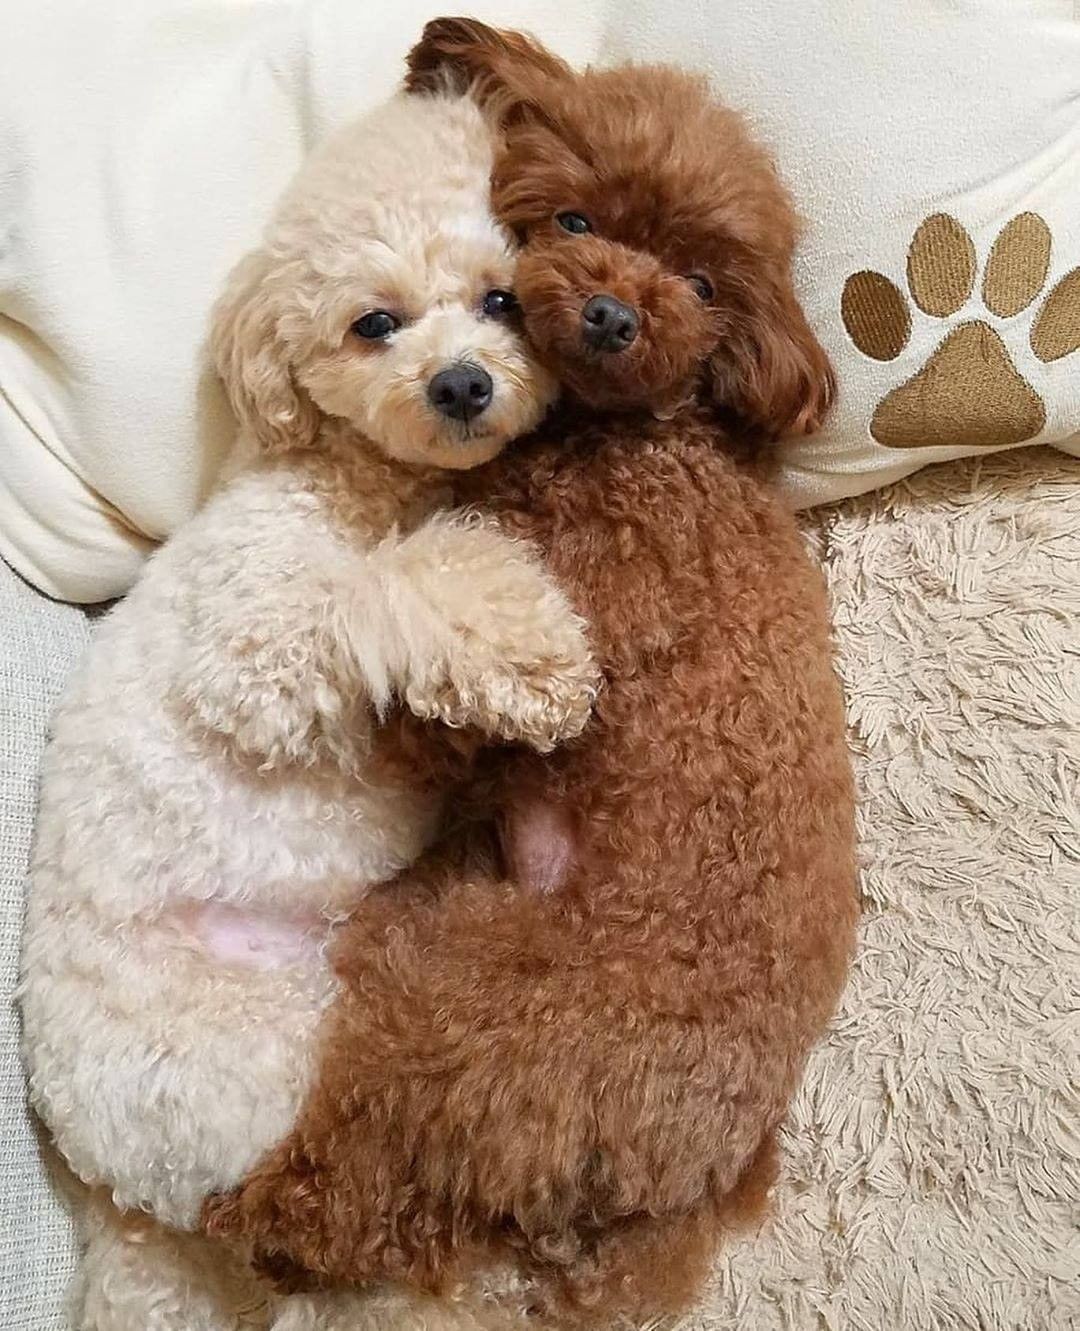 Newchic - Like Brothers🐶🐶 #Newchic
Image from @momochan.rinchan